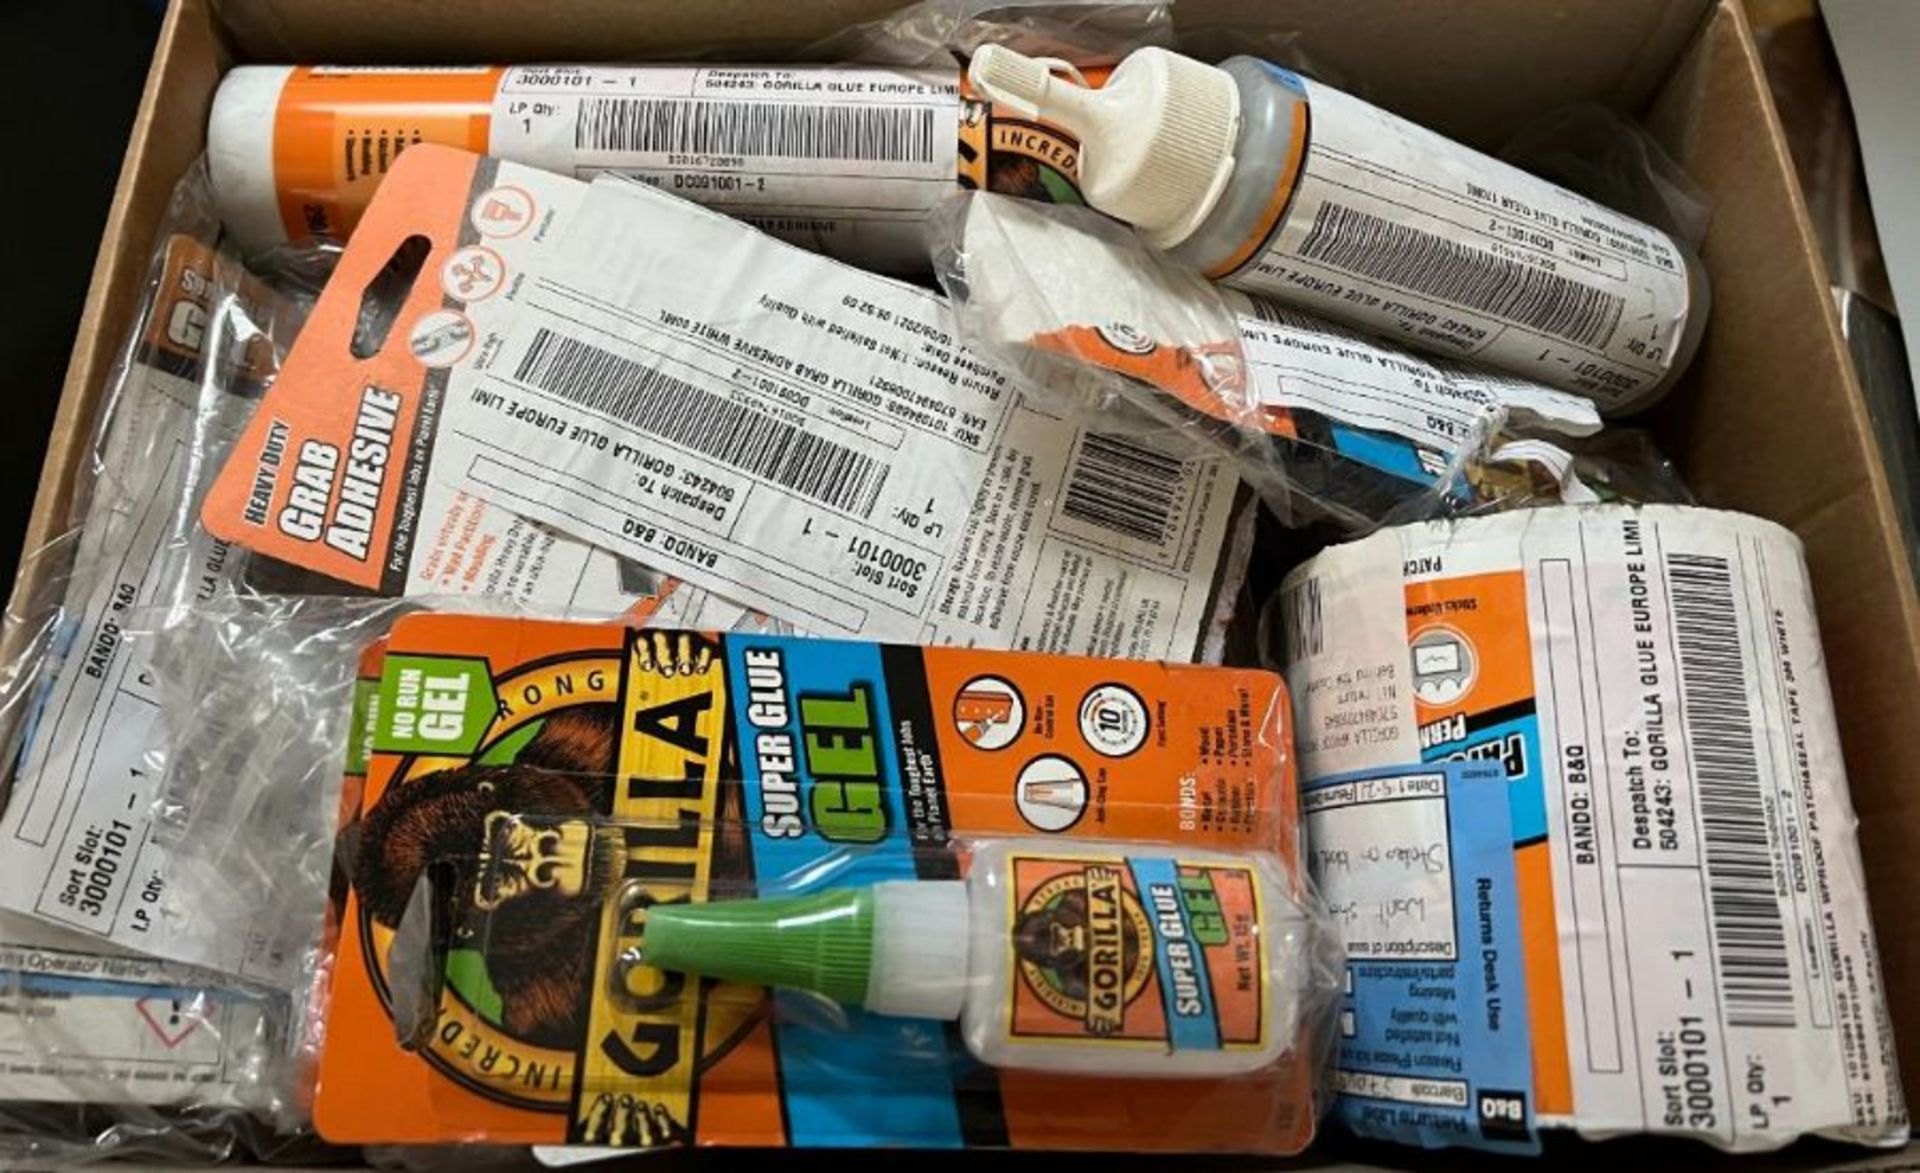 1 X LOT TO CONTAIN AN ASSORTMENT OF GORILLA GLUE PRODUCTS/ UNTESTED CUSTOMER RETURNS